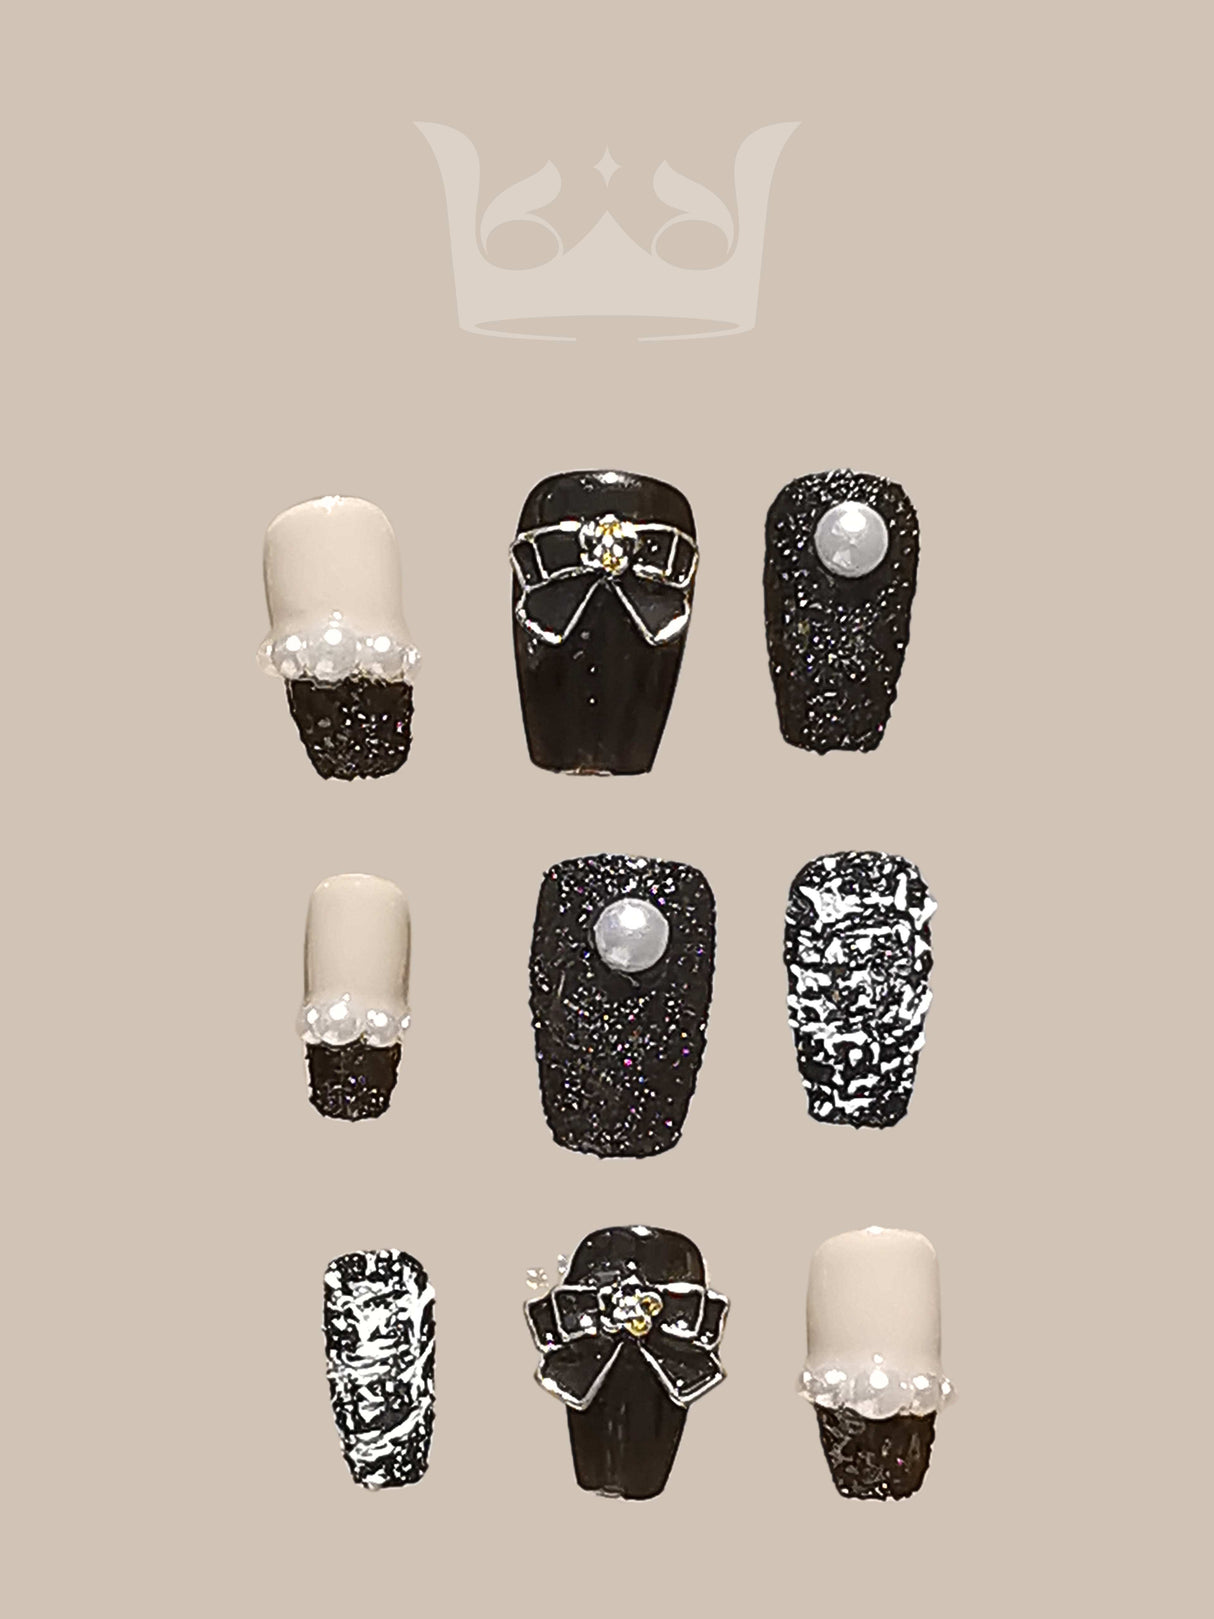 Sophisticated and glamorous nails with pearls, rhinestones, and metallic embellishments suitable for formal events or fashion-forward statements.